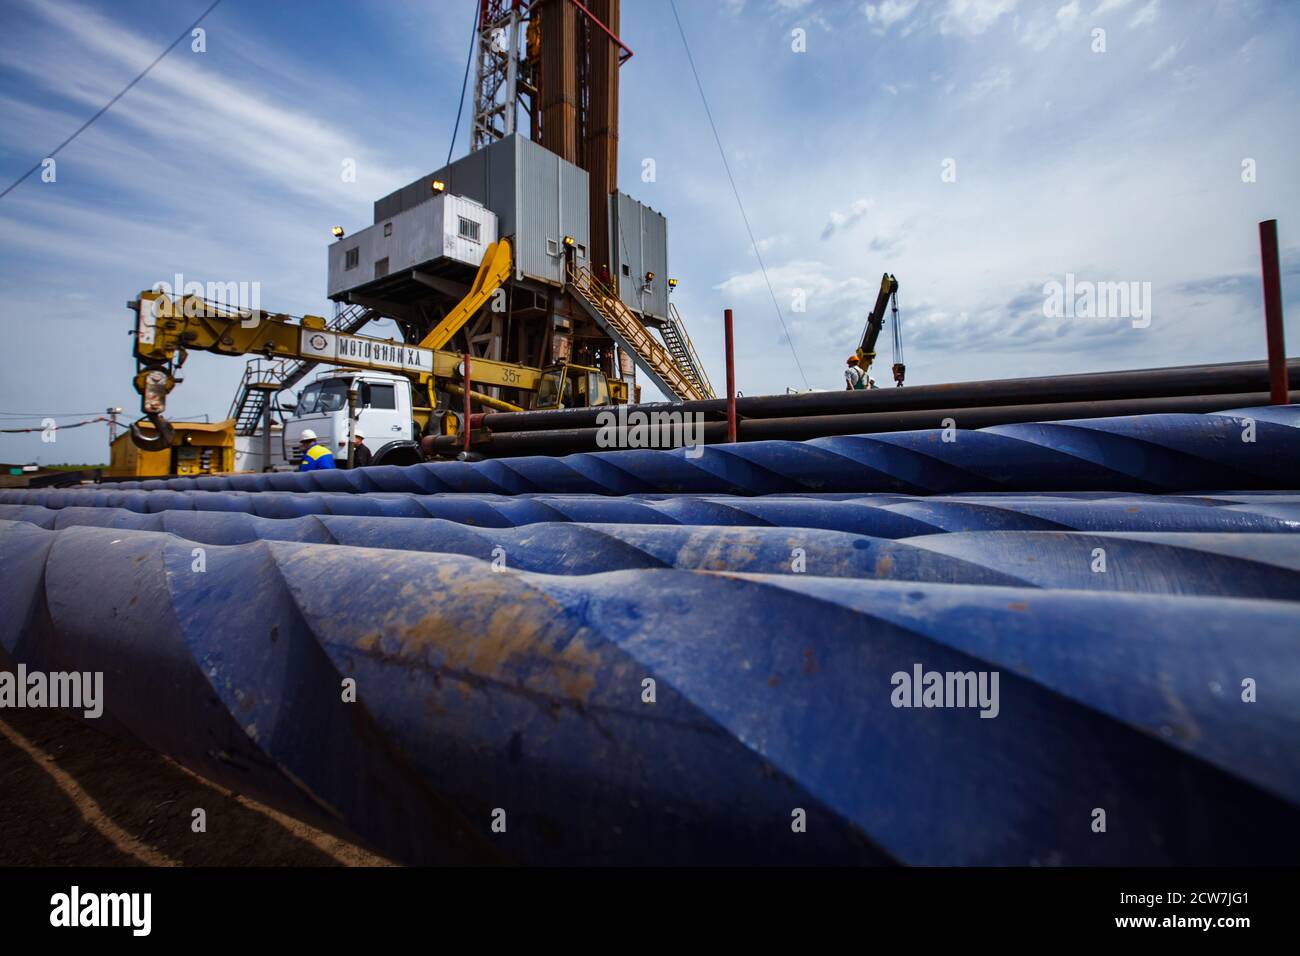 Oil deposit. Works on drilling rig. Blue rusted drilling pipes on front in focus. Oil worker, truck crane and rig on background. Blue sky and cloud. Stock Photo